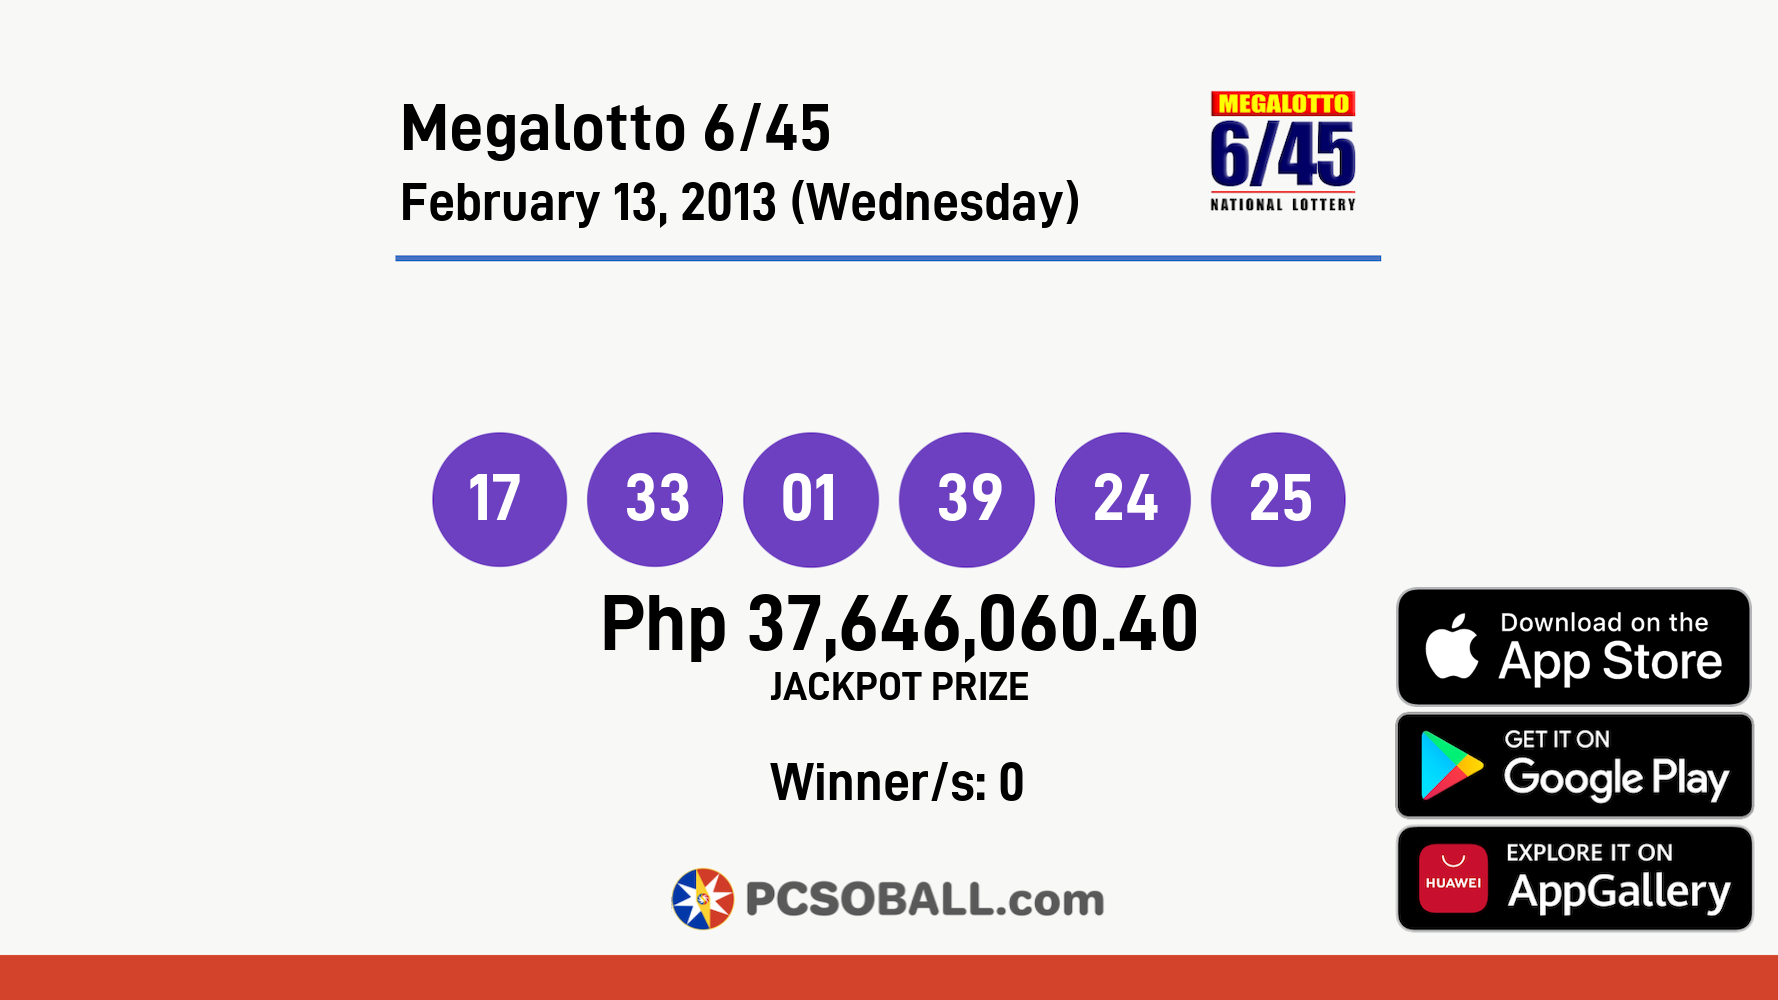 Megalotto 6/45 February 13, 2013 (Wednesday) Result